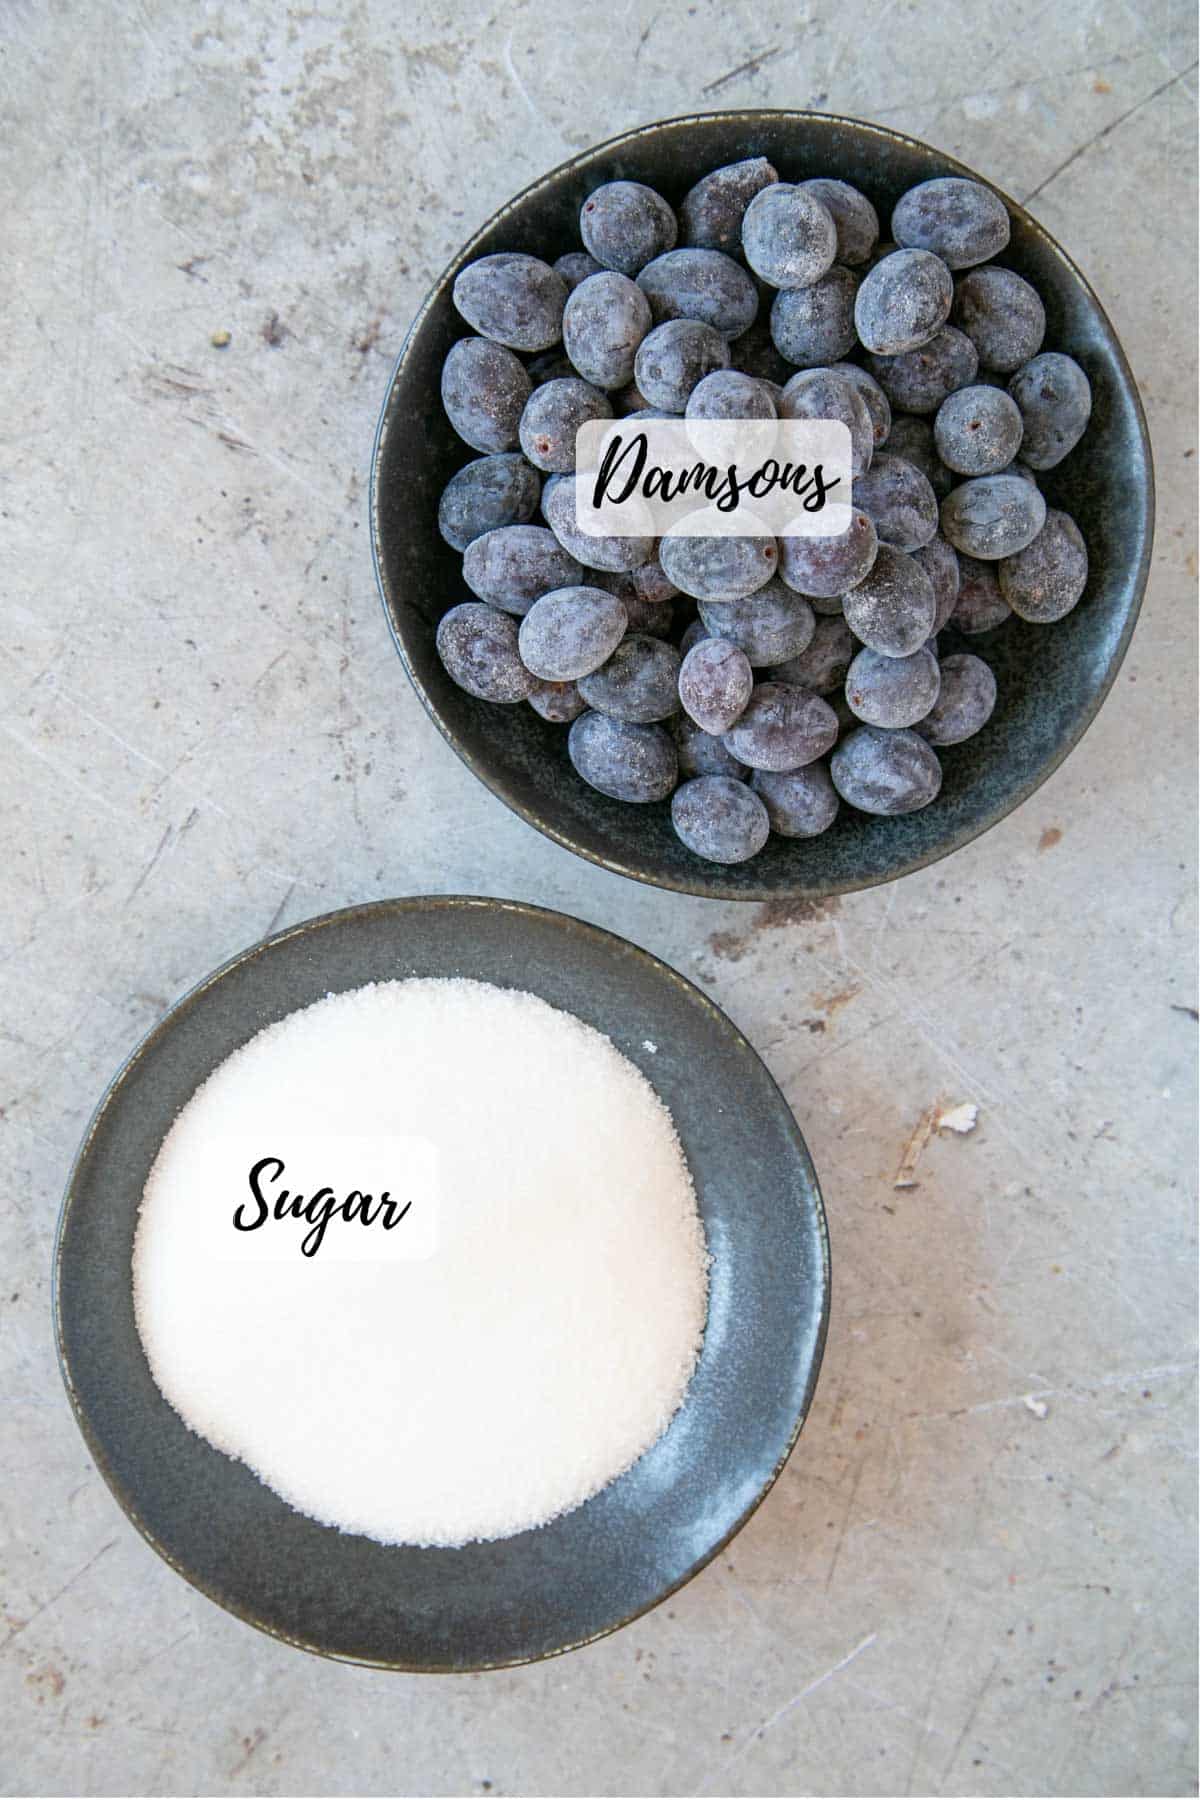 The only two ingredients needed for damson jam - damsons (here they're frozen) and sugar.